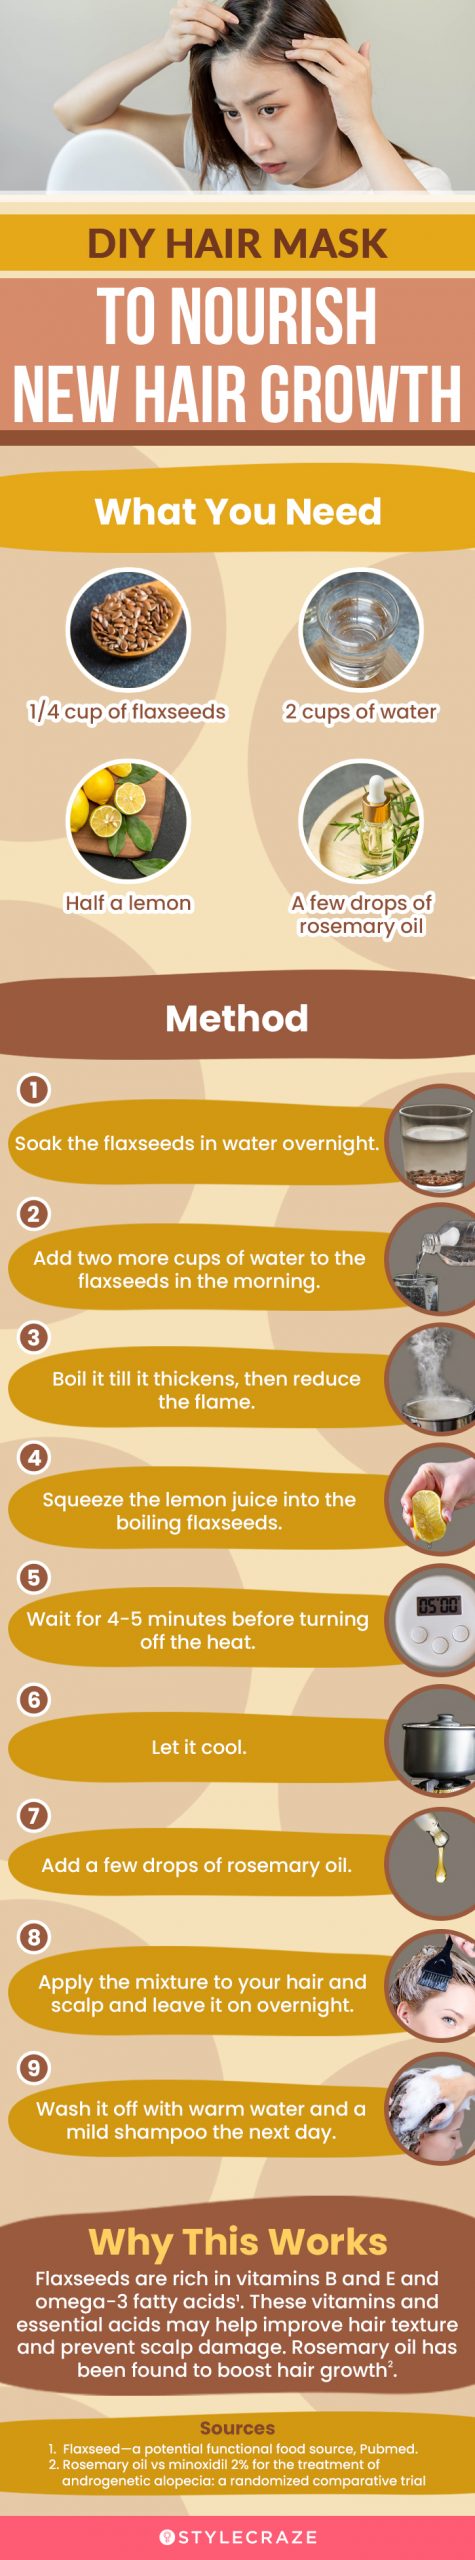 diy hair mask to nourish new hair growth (infographic)